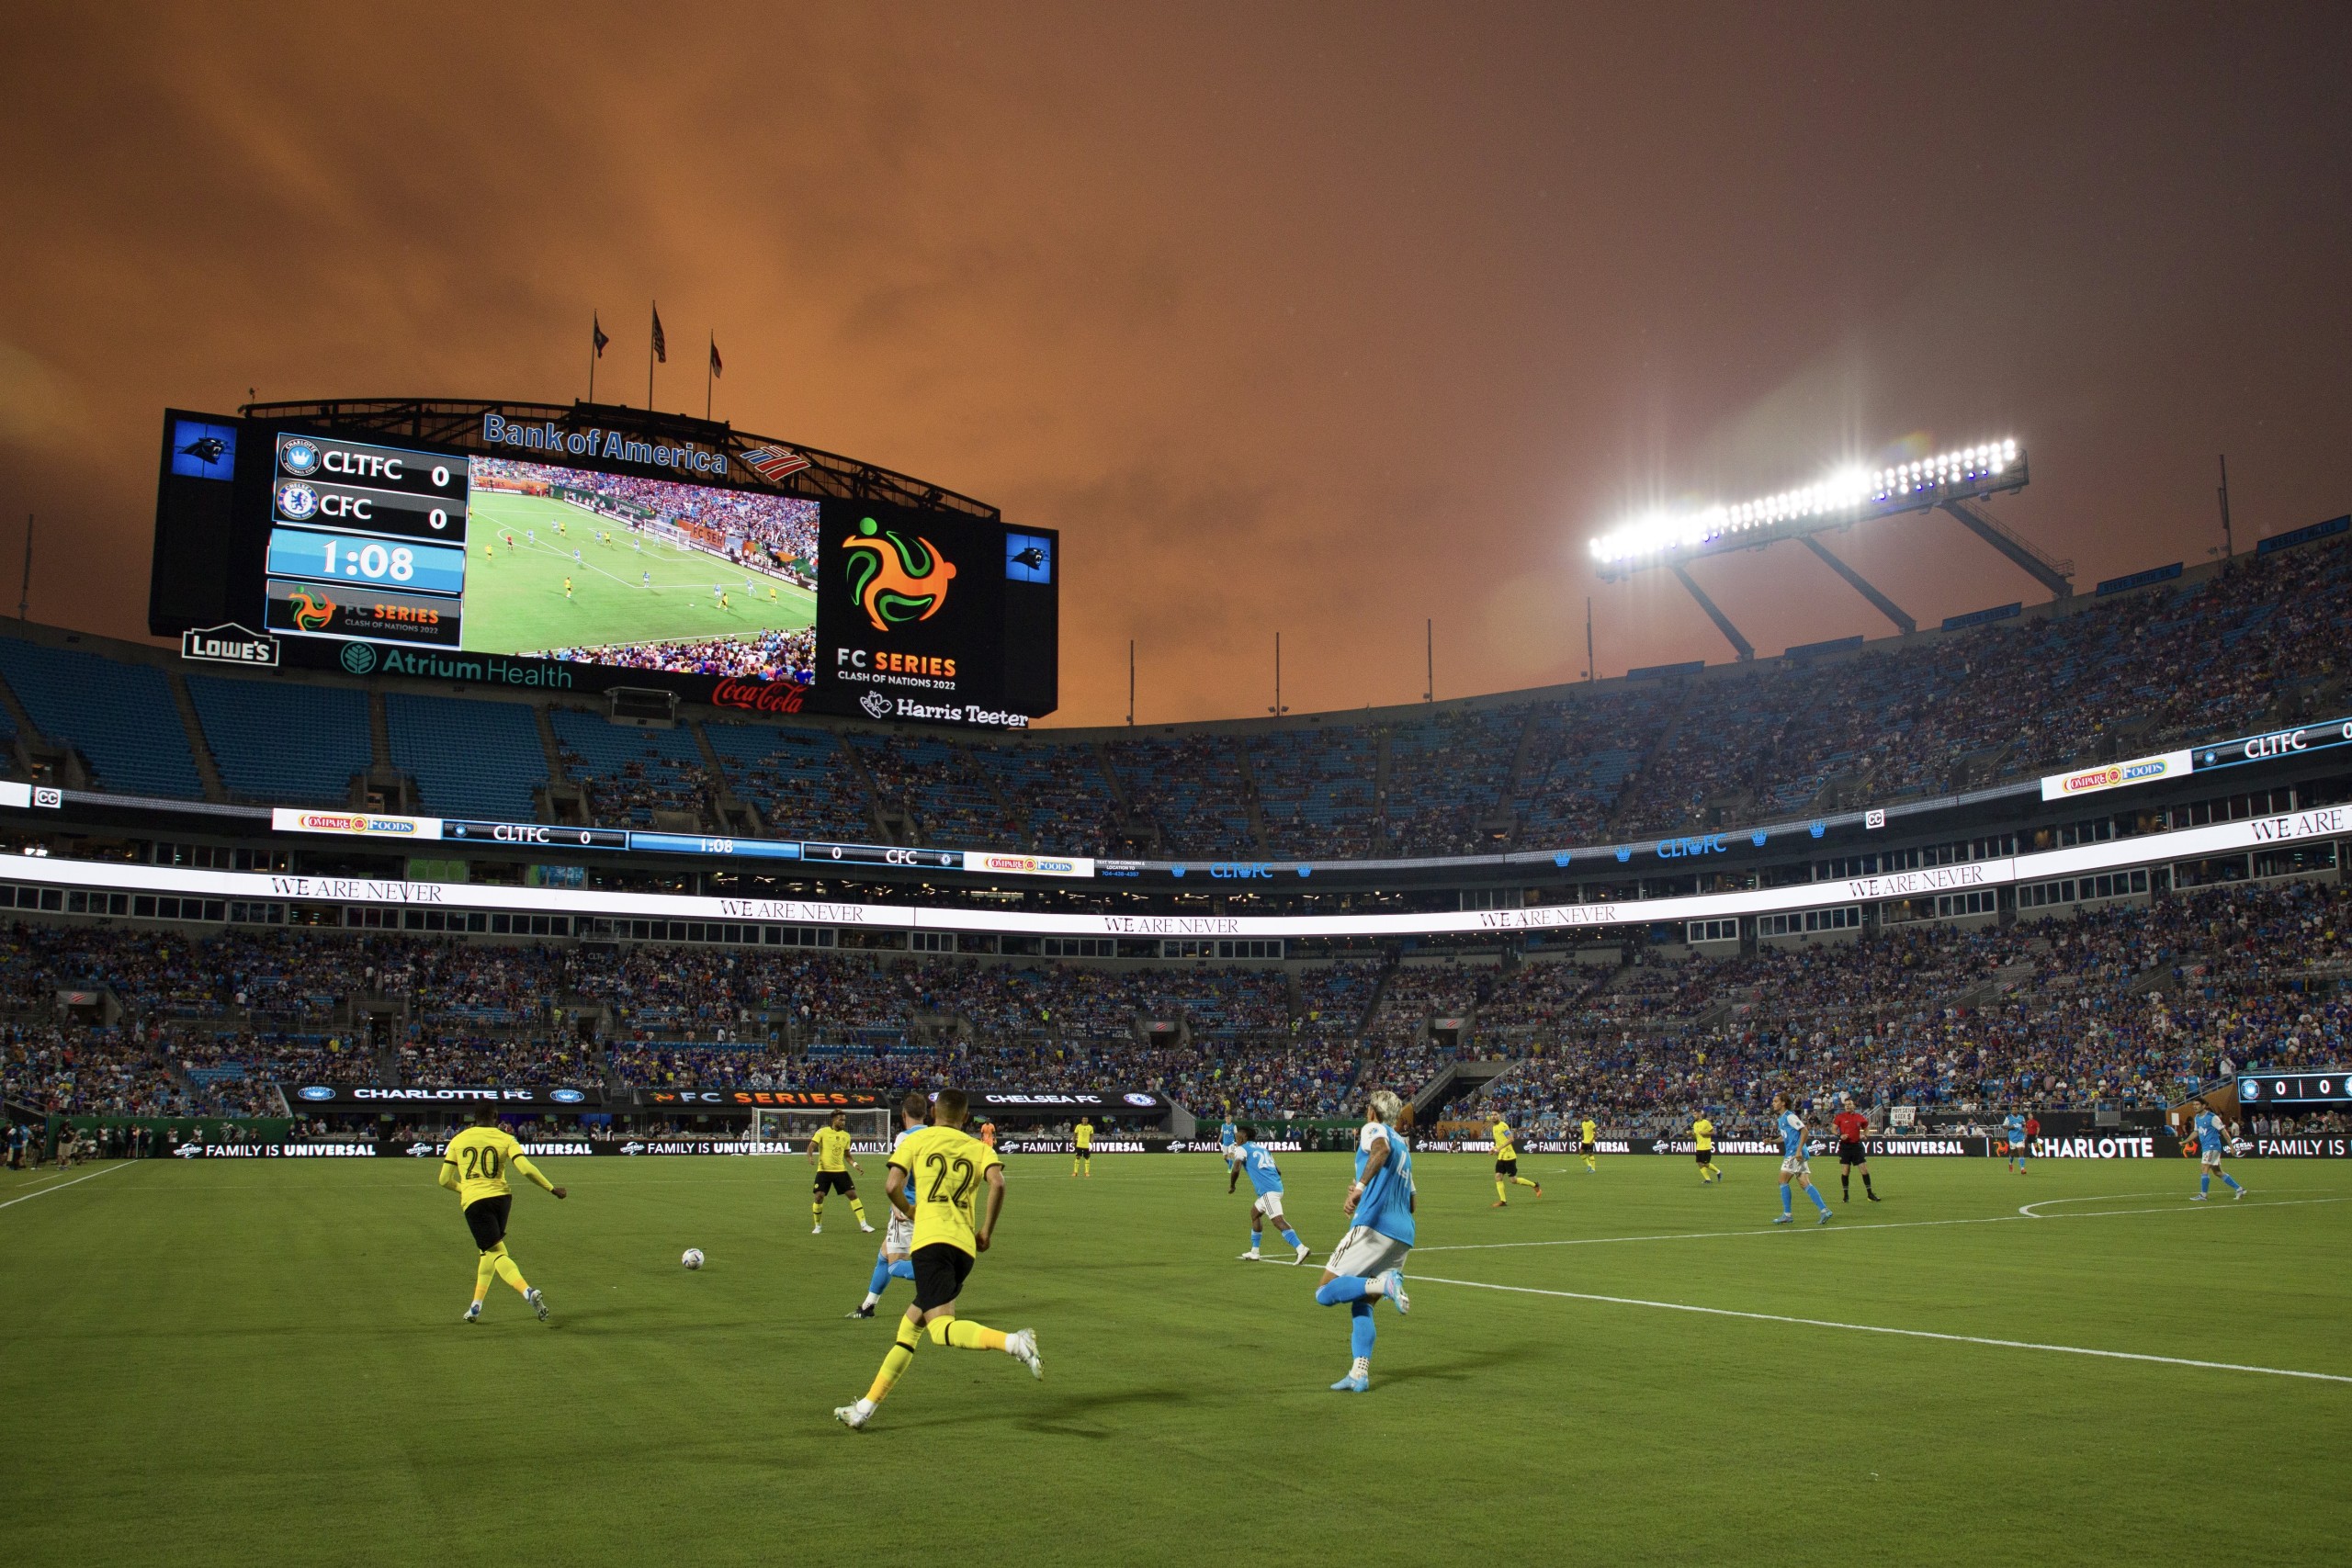 Charlotte FC to Host Chelsea FC at Bank of America Stadium on July 20